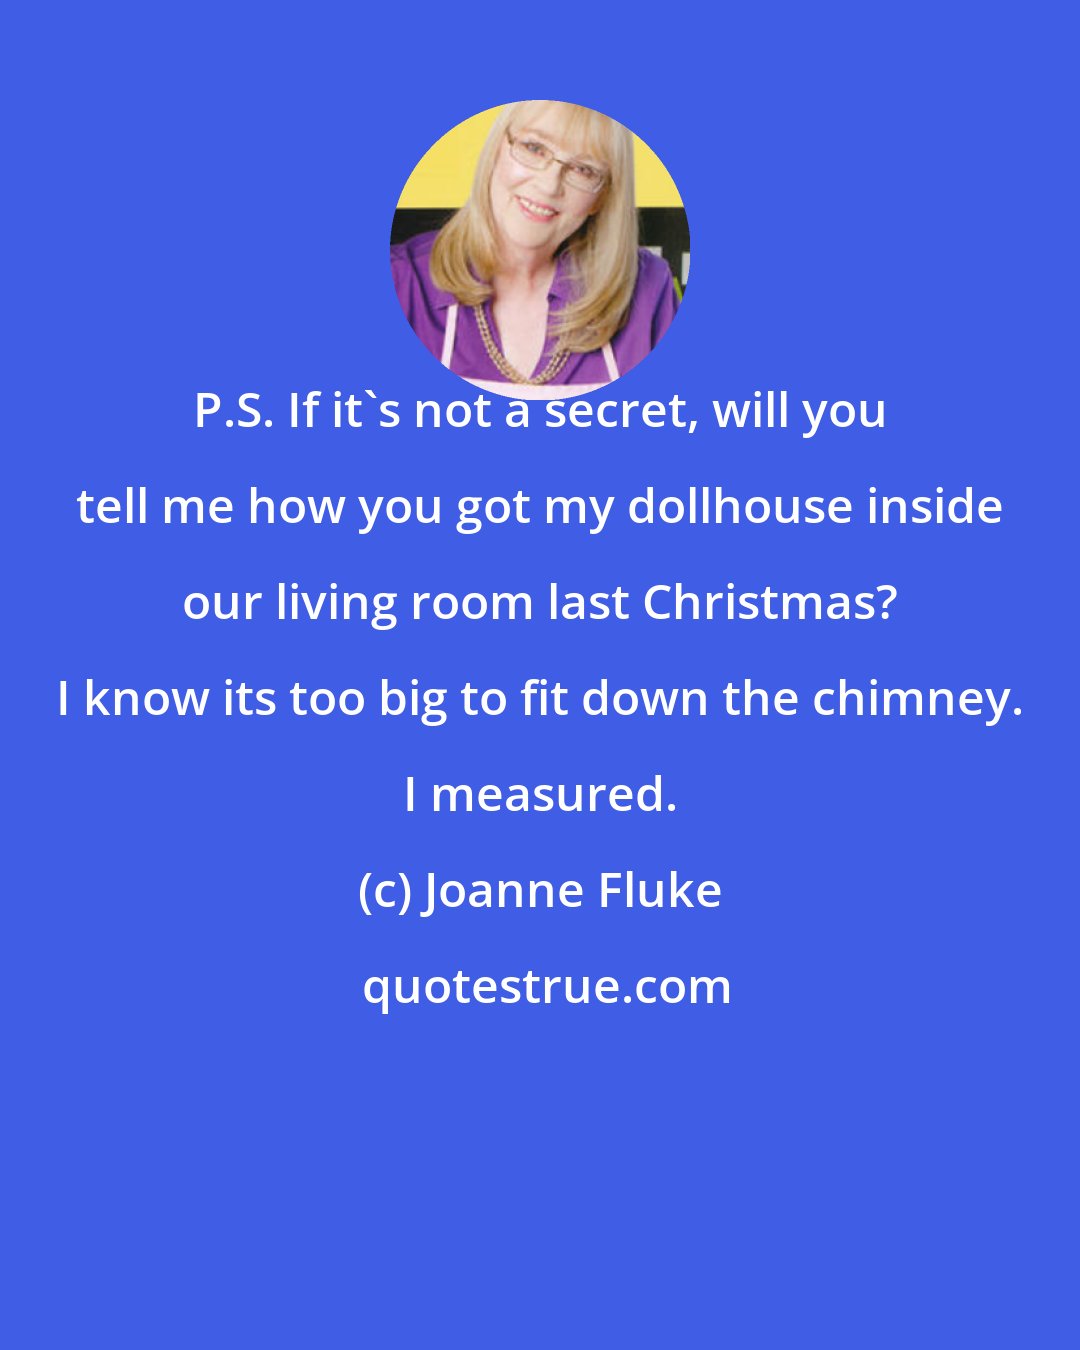 Joanne Fluke: P.S. If it's not a secret, will you tell me how you got my dollhouse inside our living room last Christmas? I know its too big to fit down the chimney. I measured.